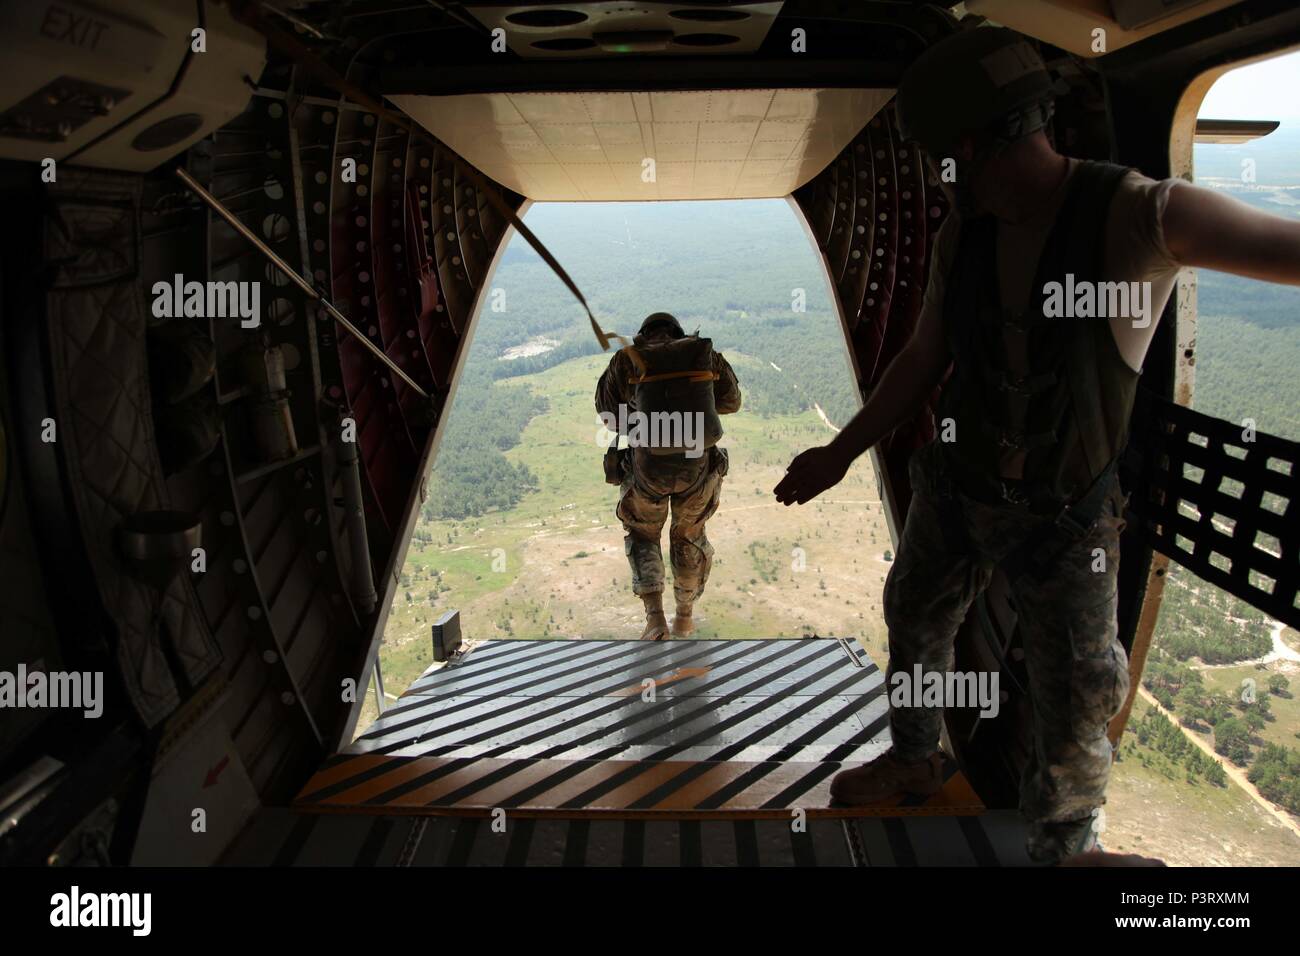 A U.S. Army Special Operations Command Paratrooper exits from the ramp of a Casa 212 aircraft after receiving the command of “Go!” from a student (right) during the culminating event of the course, July 27. Of the 40 Paratroopers who began the course, led by 4th Military Information Support Group jumpmasters, only 23 completed it successfully. The course concentrates on the actions taken on the ground and in the air to safely exit Paratroopers from a number of different aircraft. (U.S. Army photo by Staff Sgt. Kissta DiGregorio/Released) Stock Photo